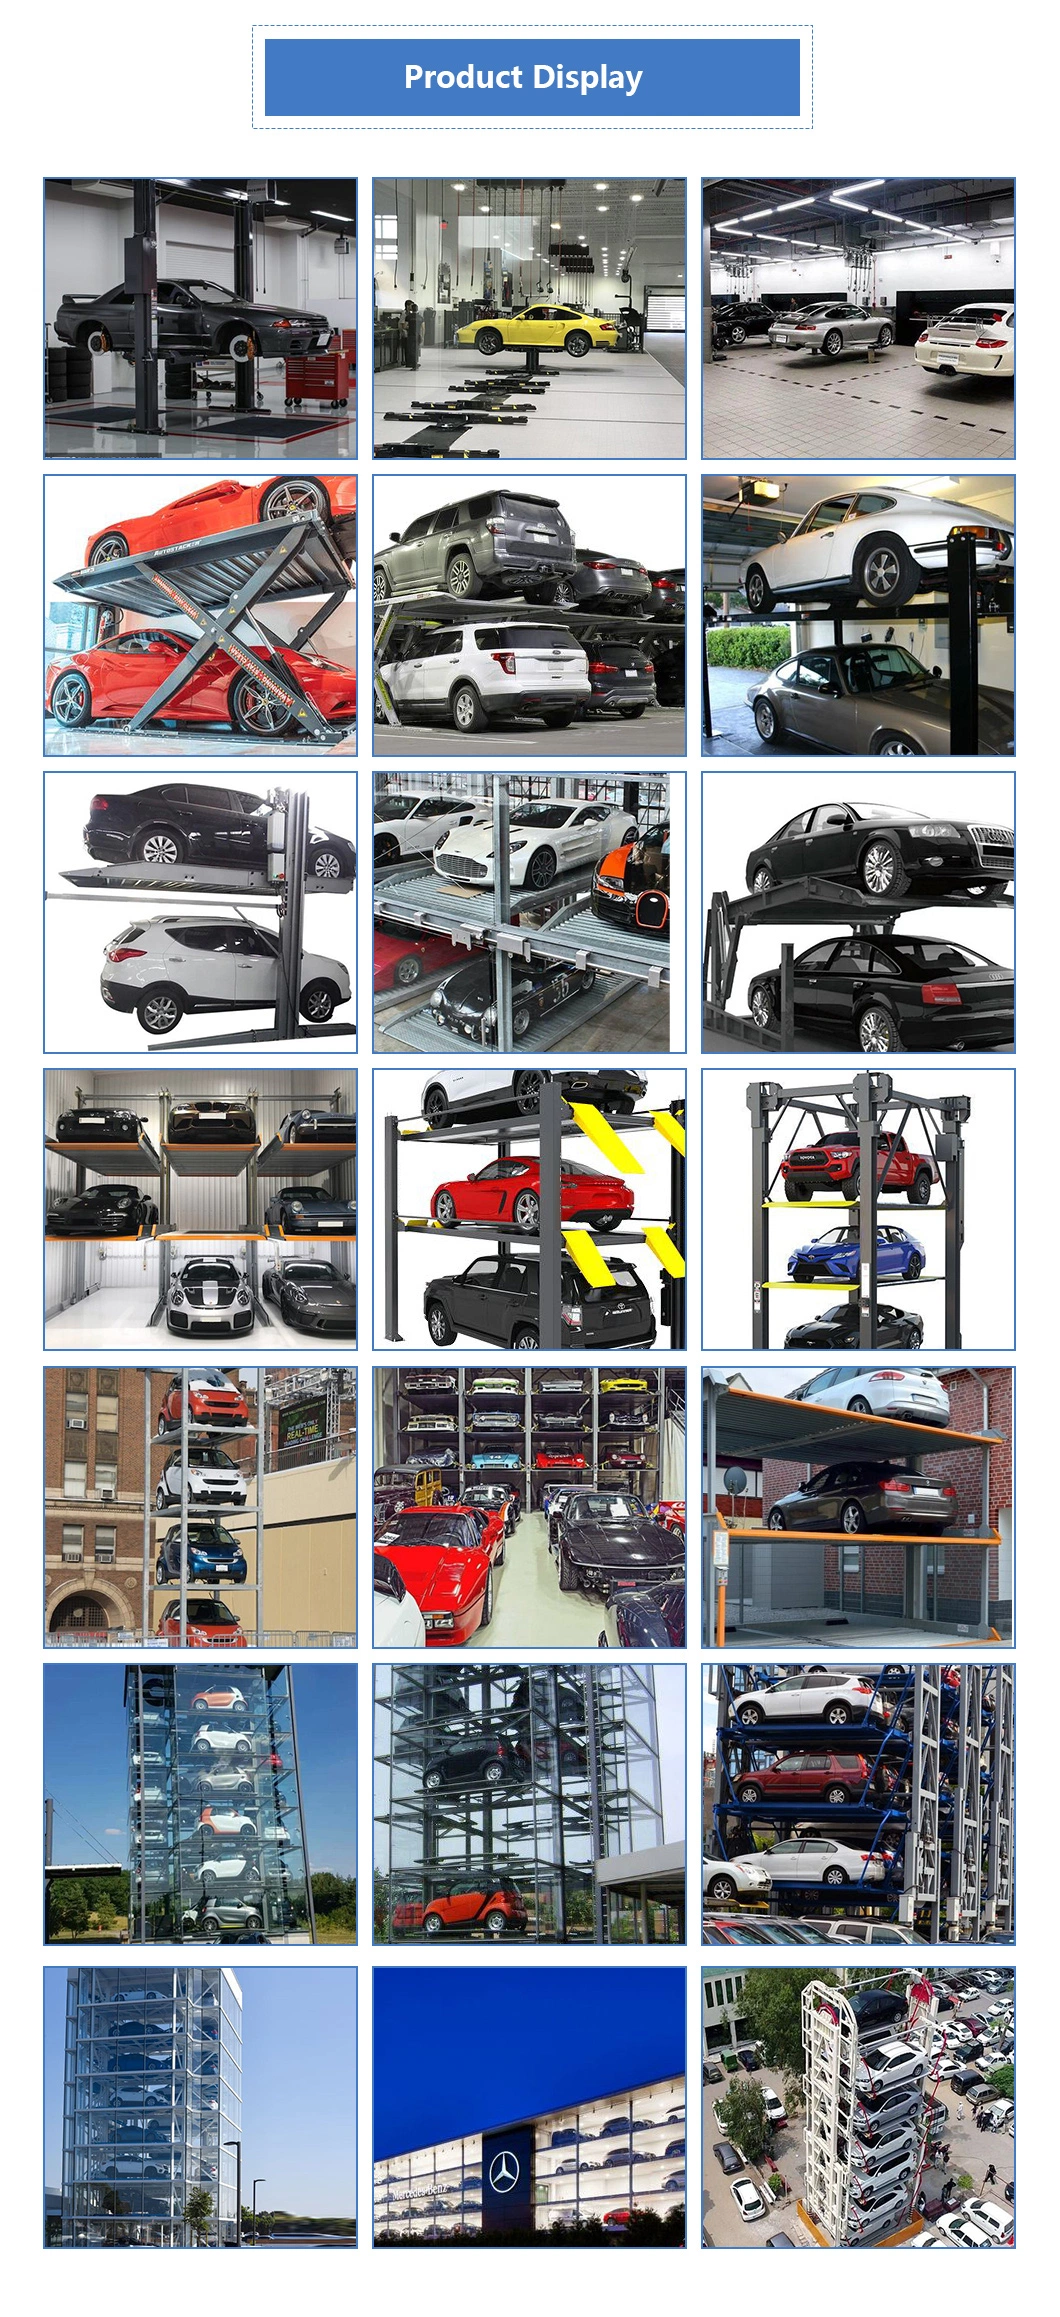 Exclusive Promotion: High-Quality Auto Lift Parking Equipment for Outdoor Spaces